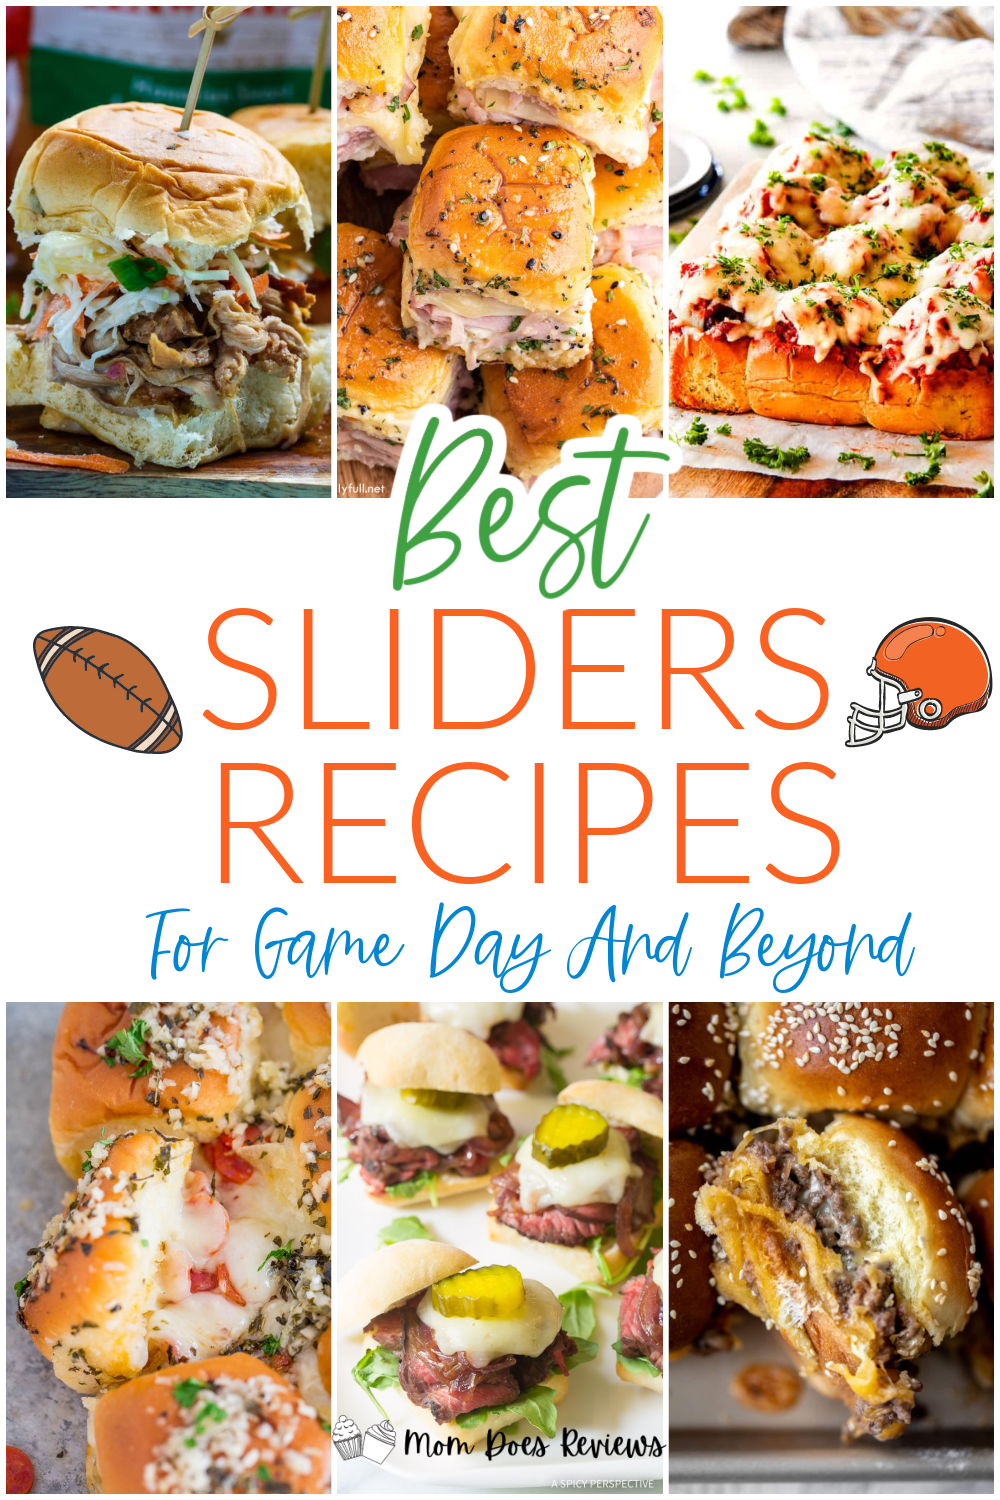 20+ of the Best Slider Recipes for Game Day!